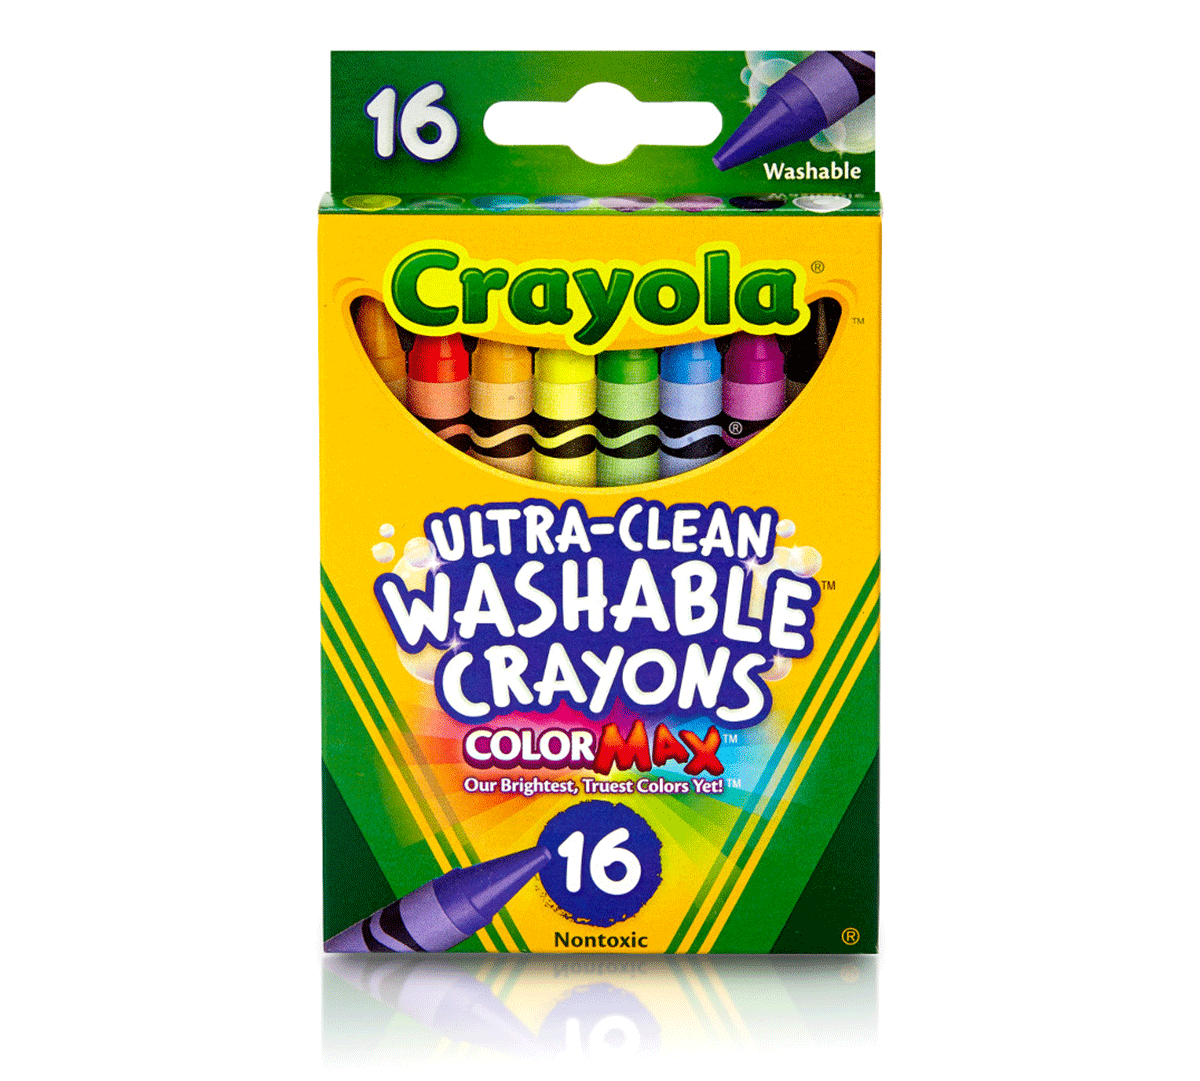 Crayola Classic Color Crayons 16 Pack Includes 5 Color Flag Set Crayola Large Washable Crayons 16 Pack 